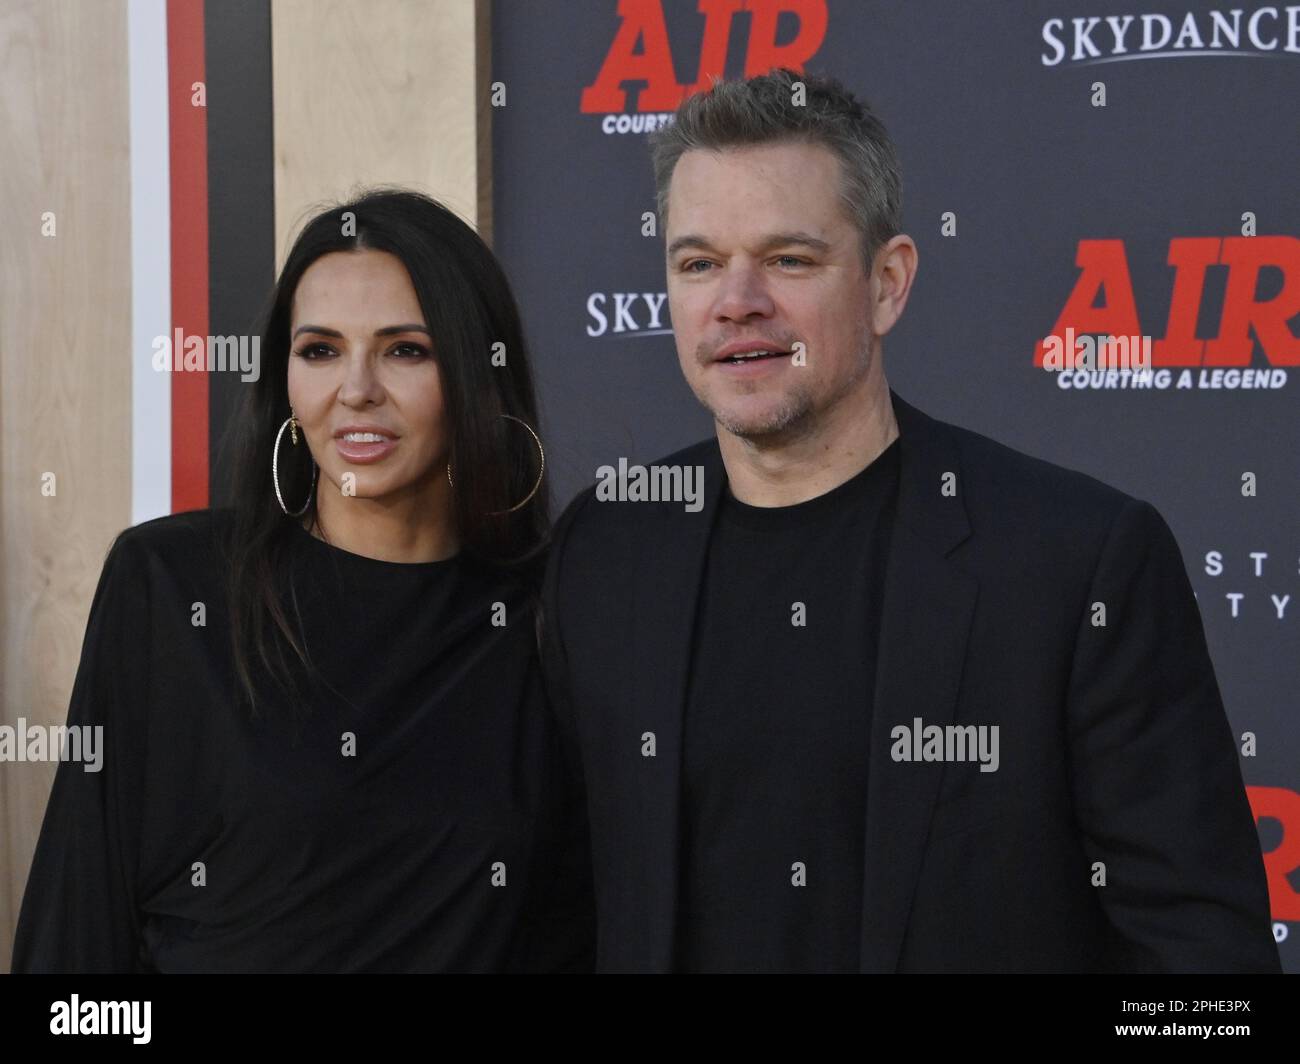 Los Angeles, United States. 27th Mar, 2023. Cast member Matt Damon and his wife Luciana Barroso attend the premiere of the motion picture drama "Air" at the regency Village Theatre in the Westwood section of Los Angeles on Monday, March 27, 2023. Storyline: Follows the history of shoe salesman Sonny Vaccaro, and how he led Nike in its pursuit of the greatest athlete in the history of basketball: Michael Jordan. Photo by Jim Ruymen/UPI Credit: UPI/Alamy Live News Stock Photo